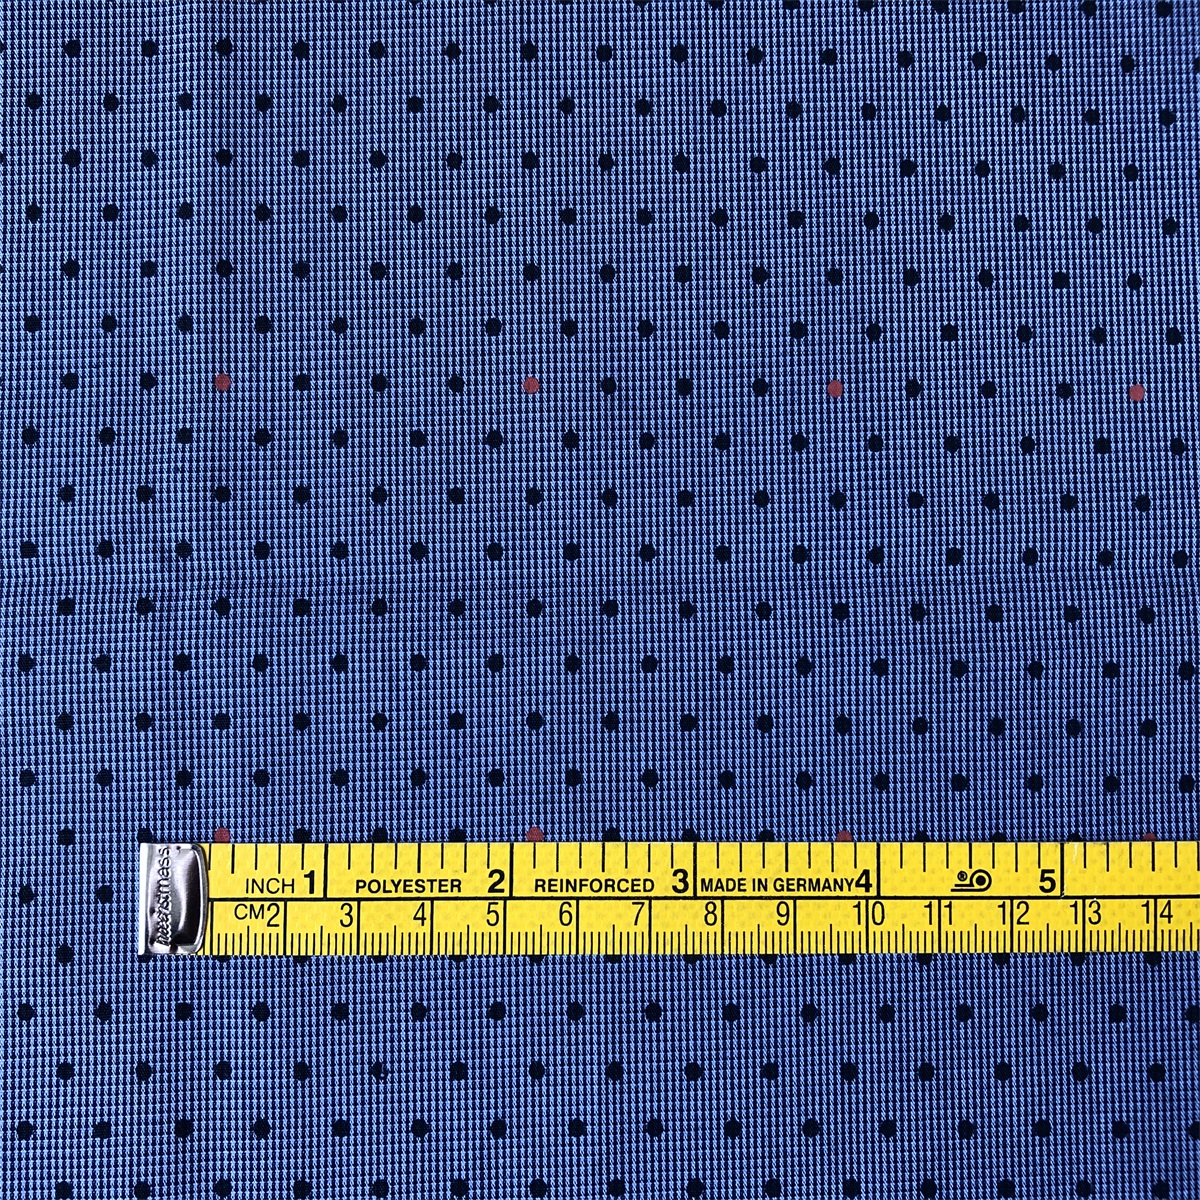 Customized pattern Cotton Fabric for men's casual shirts 100% cotton printed on yarn dyed plain check woven shirts fabric